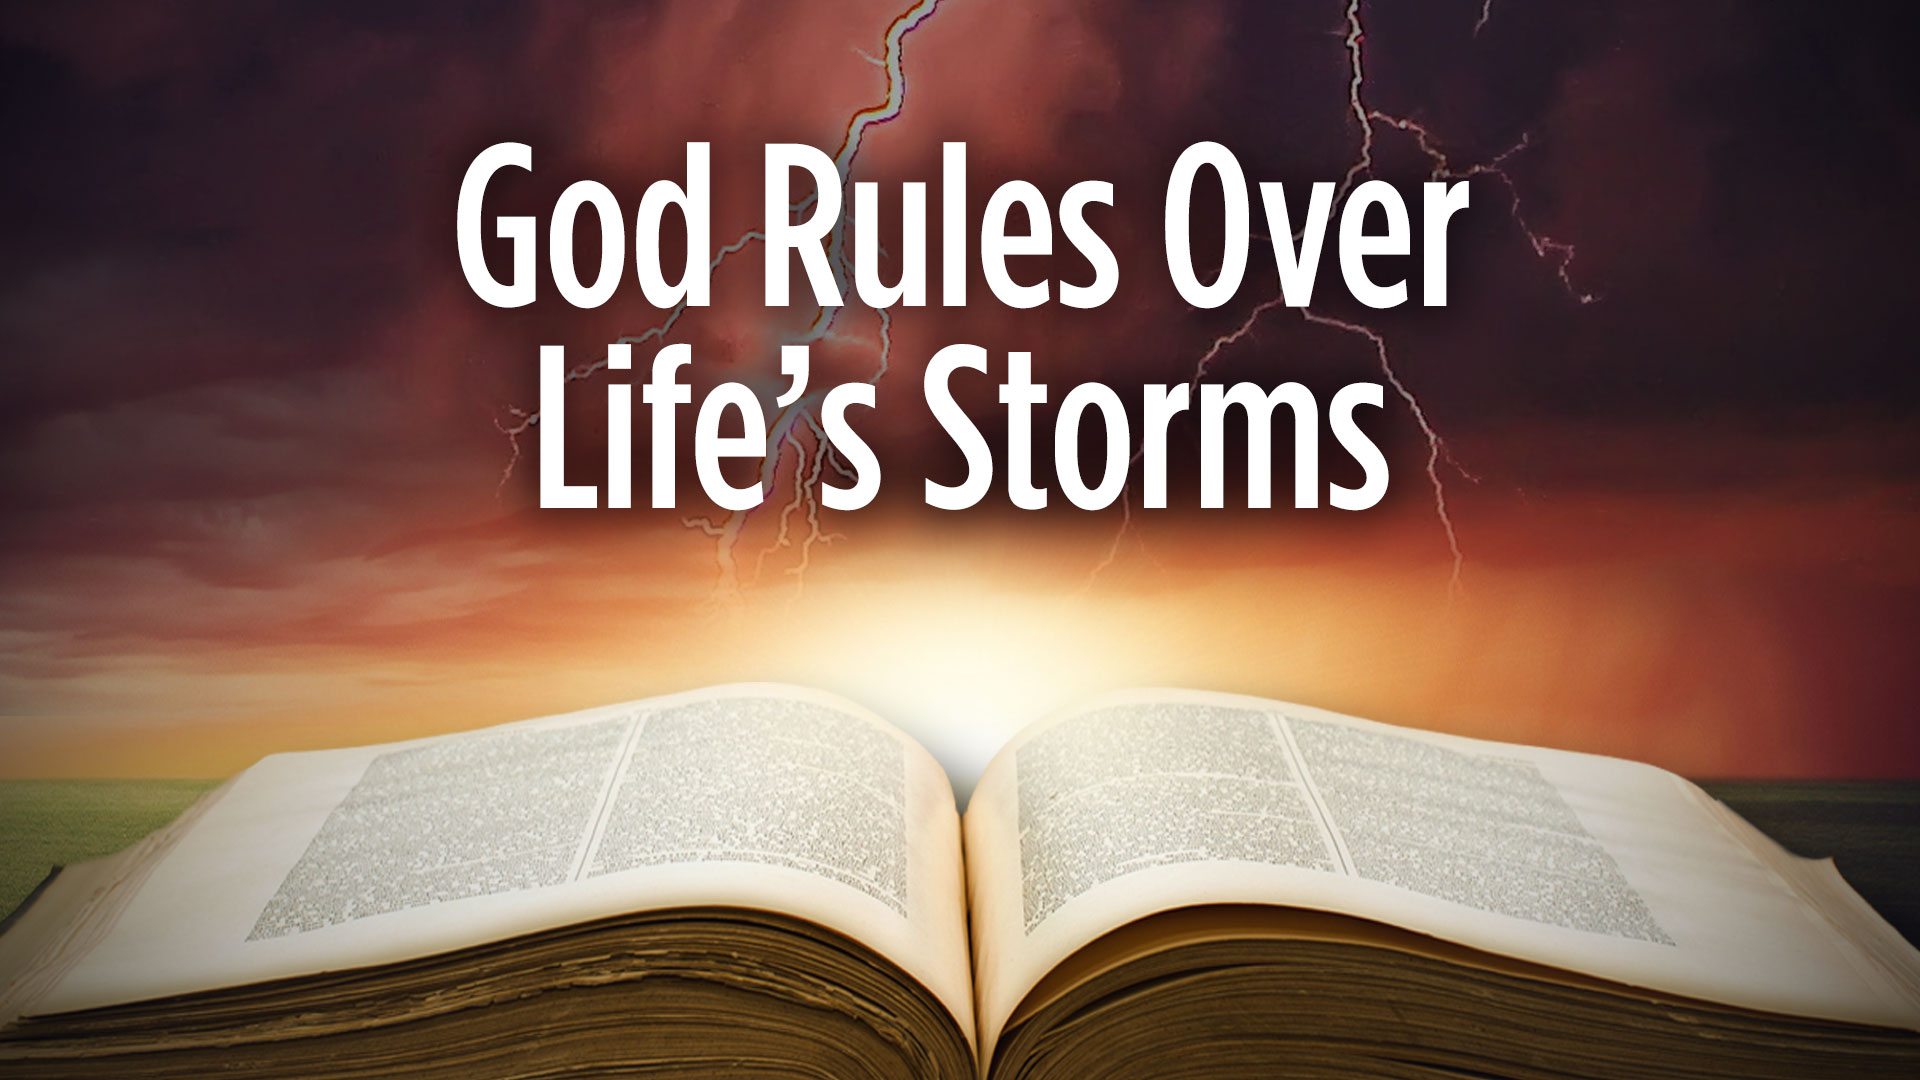 God Rules Over Lifes Storms 1920x1080